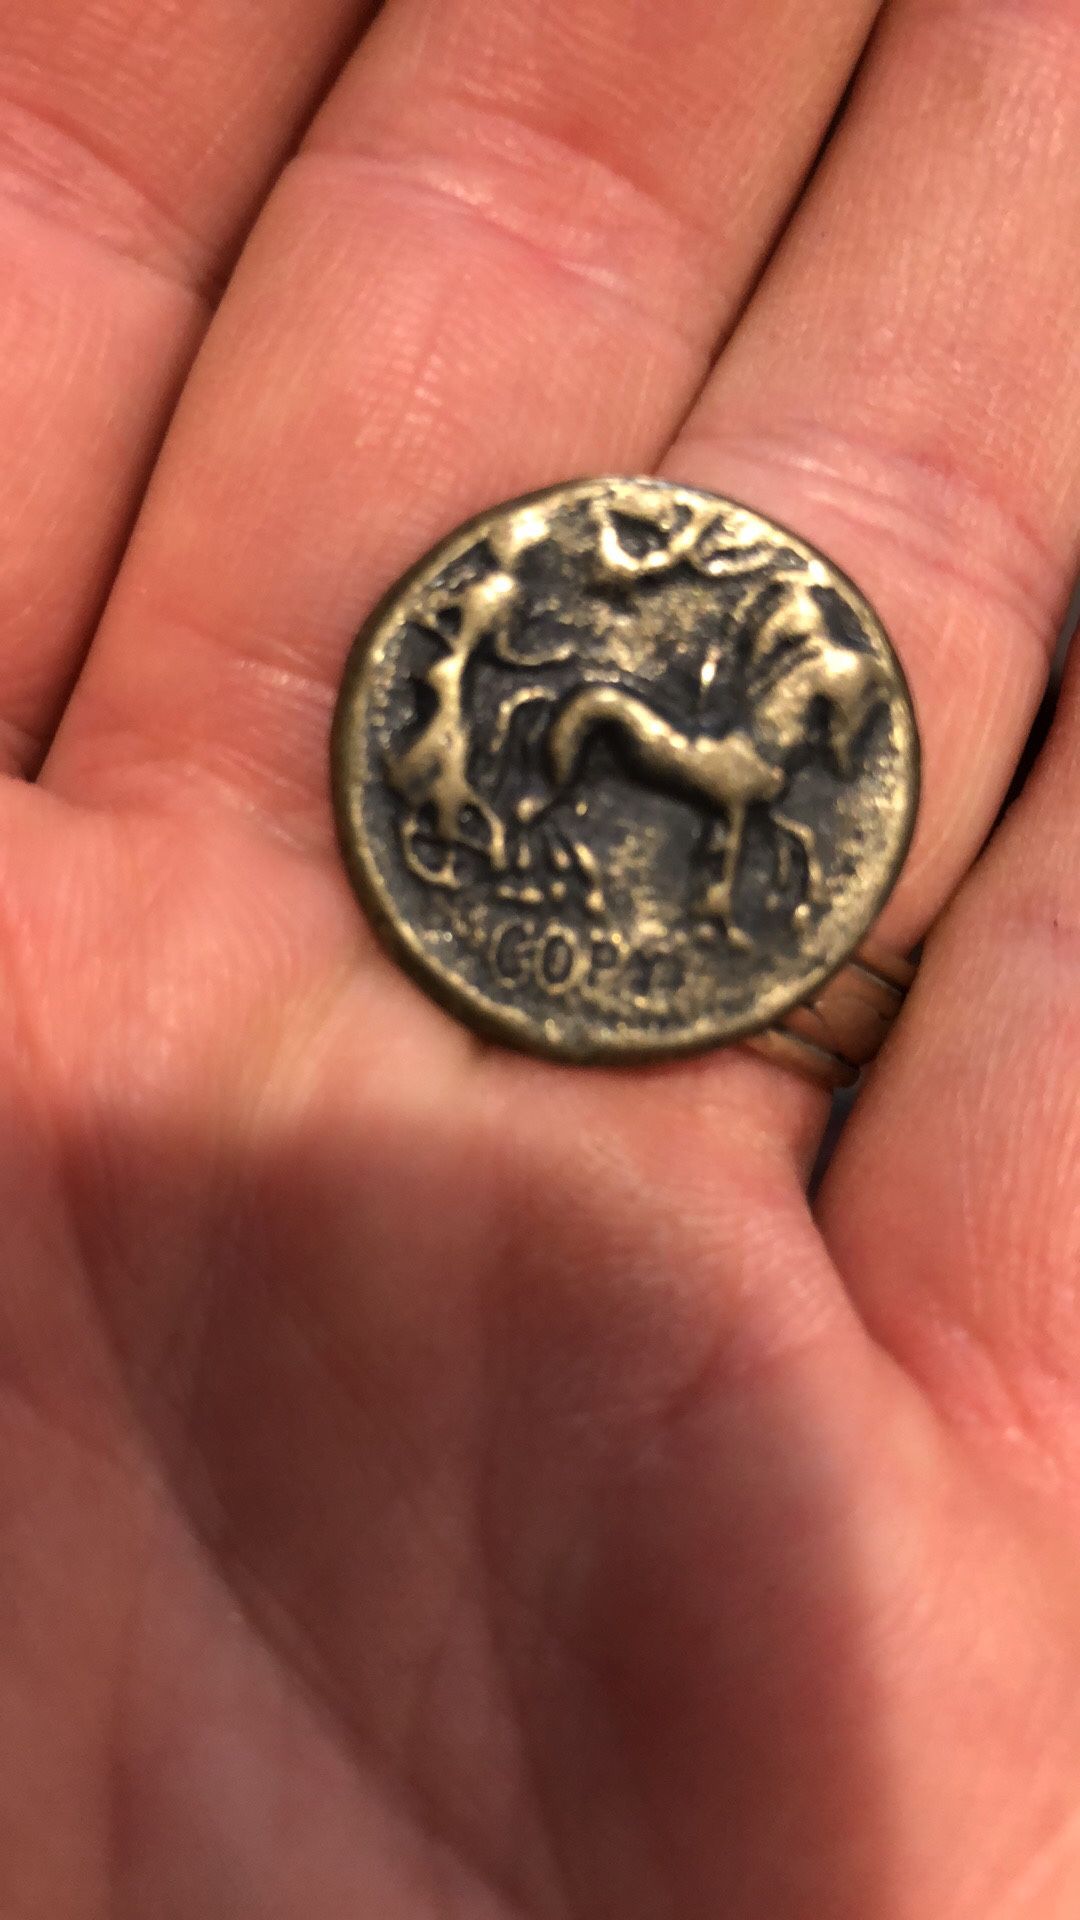 Ancient coin. This is very old and authentic